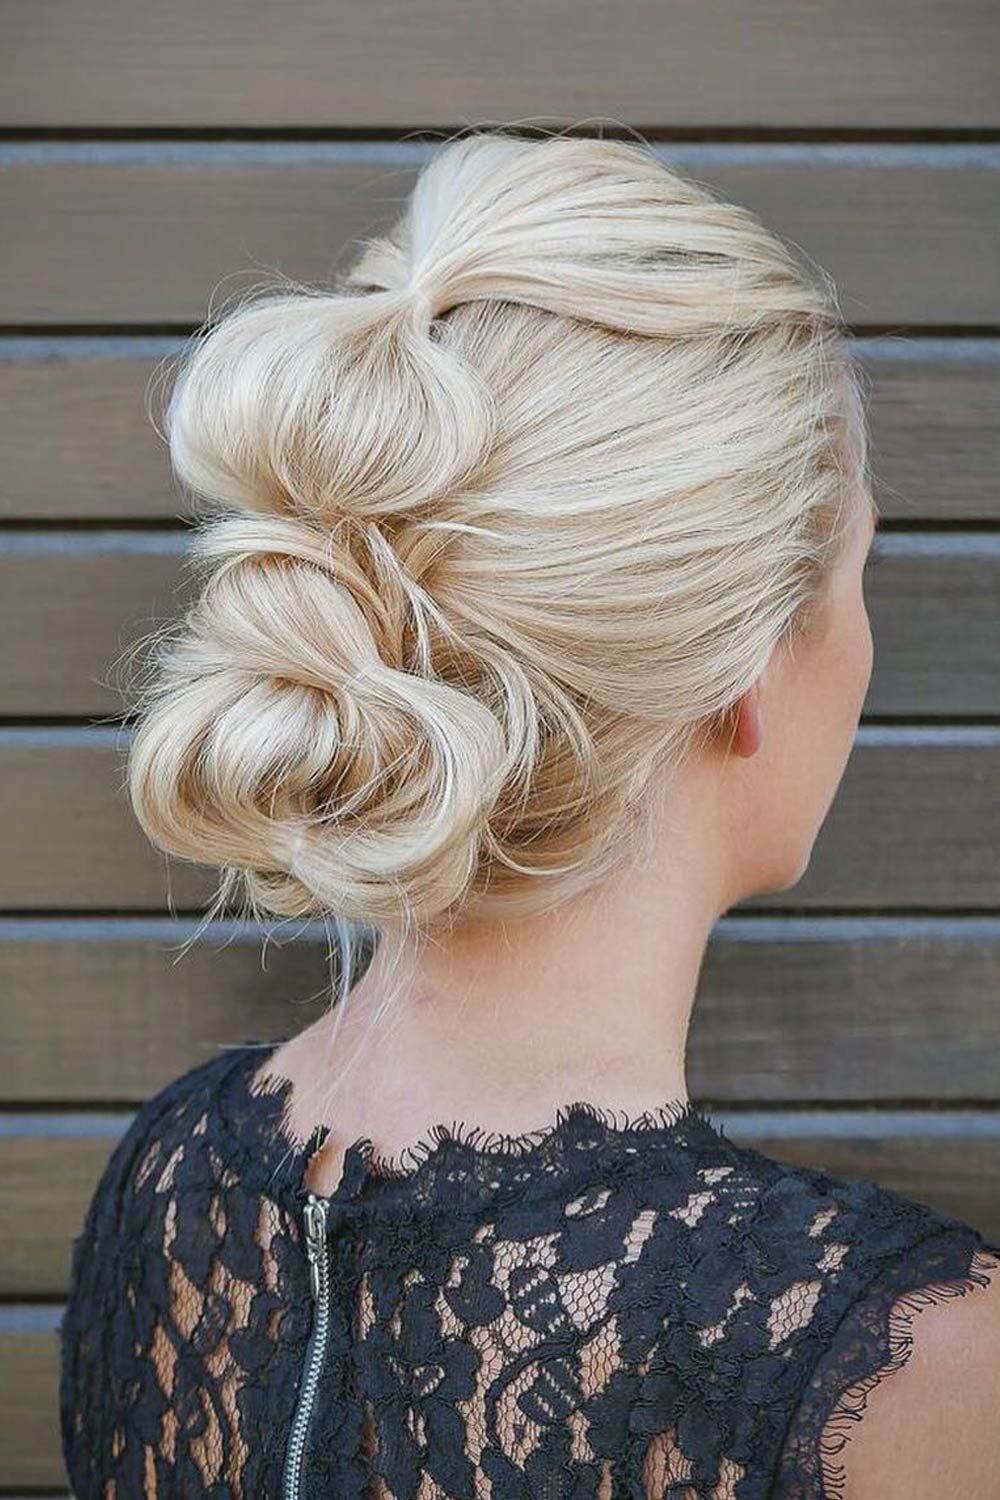 Bubble Updo Hairstyle